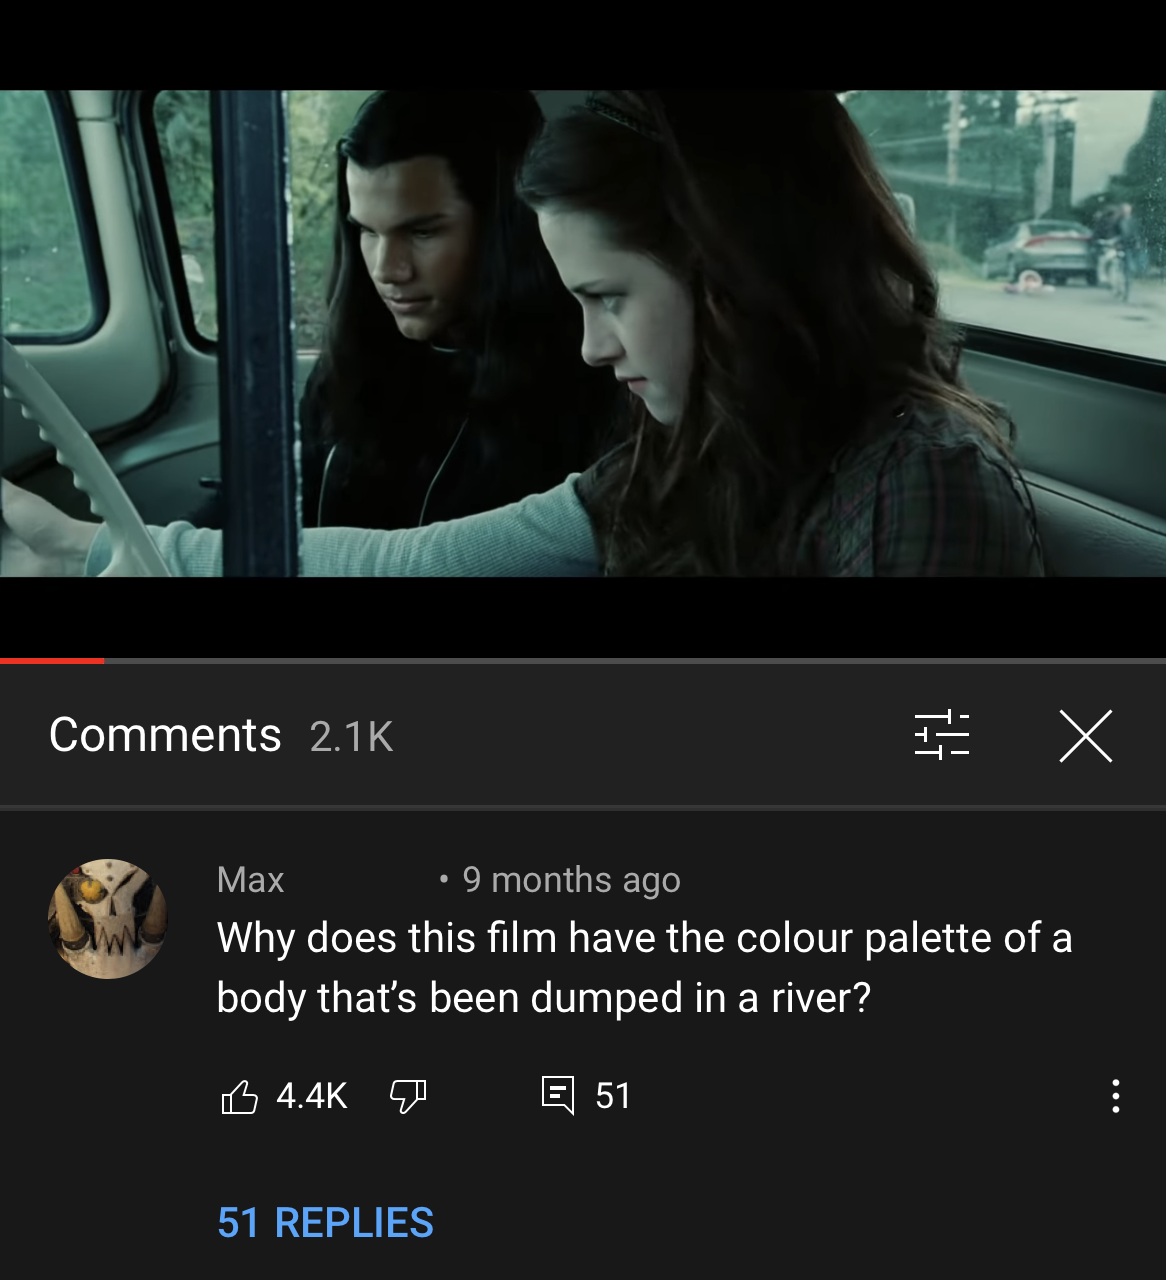 screenshot - E X Max 9 months ago Why does this film have the colour palette of a body that's been dumped in a river? El 51 51 Replies